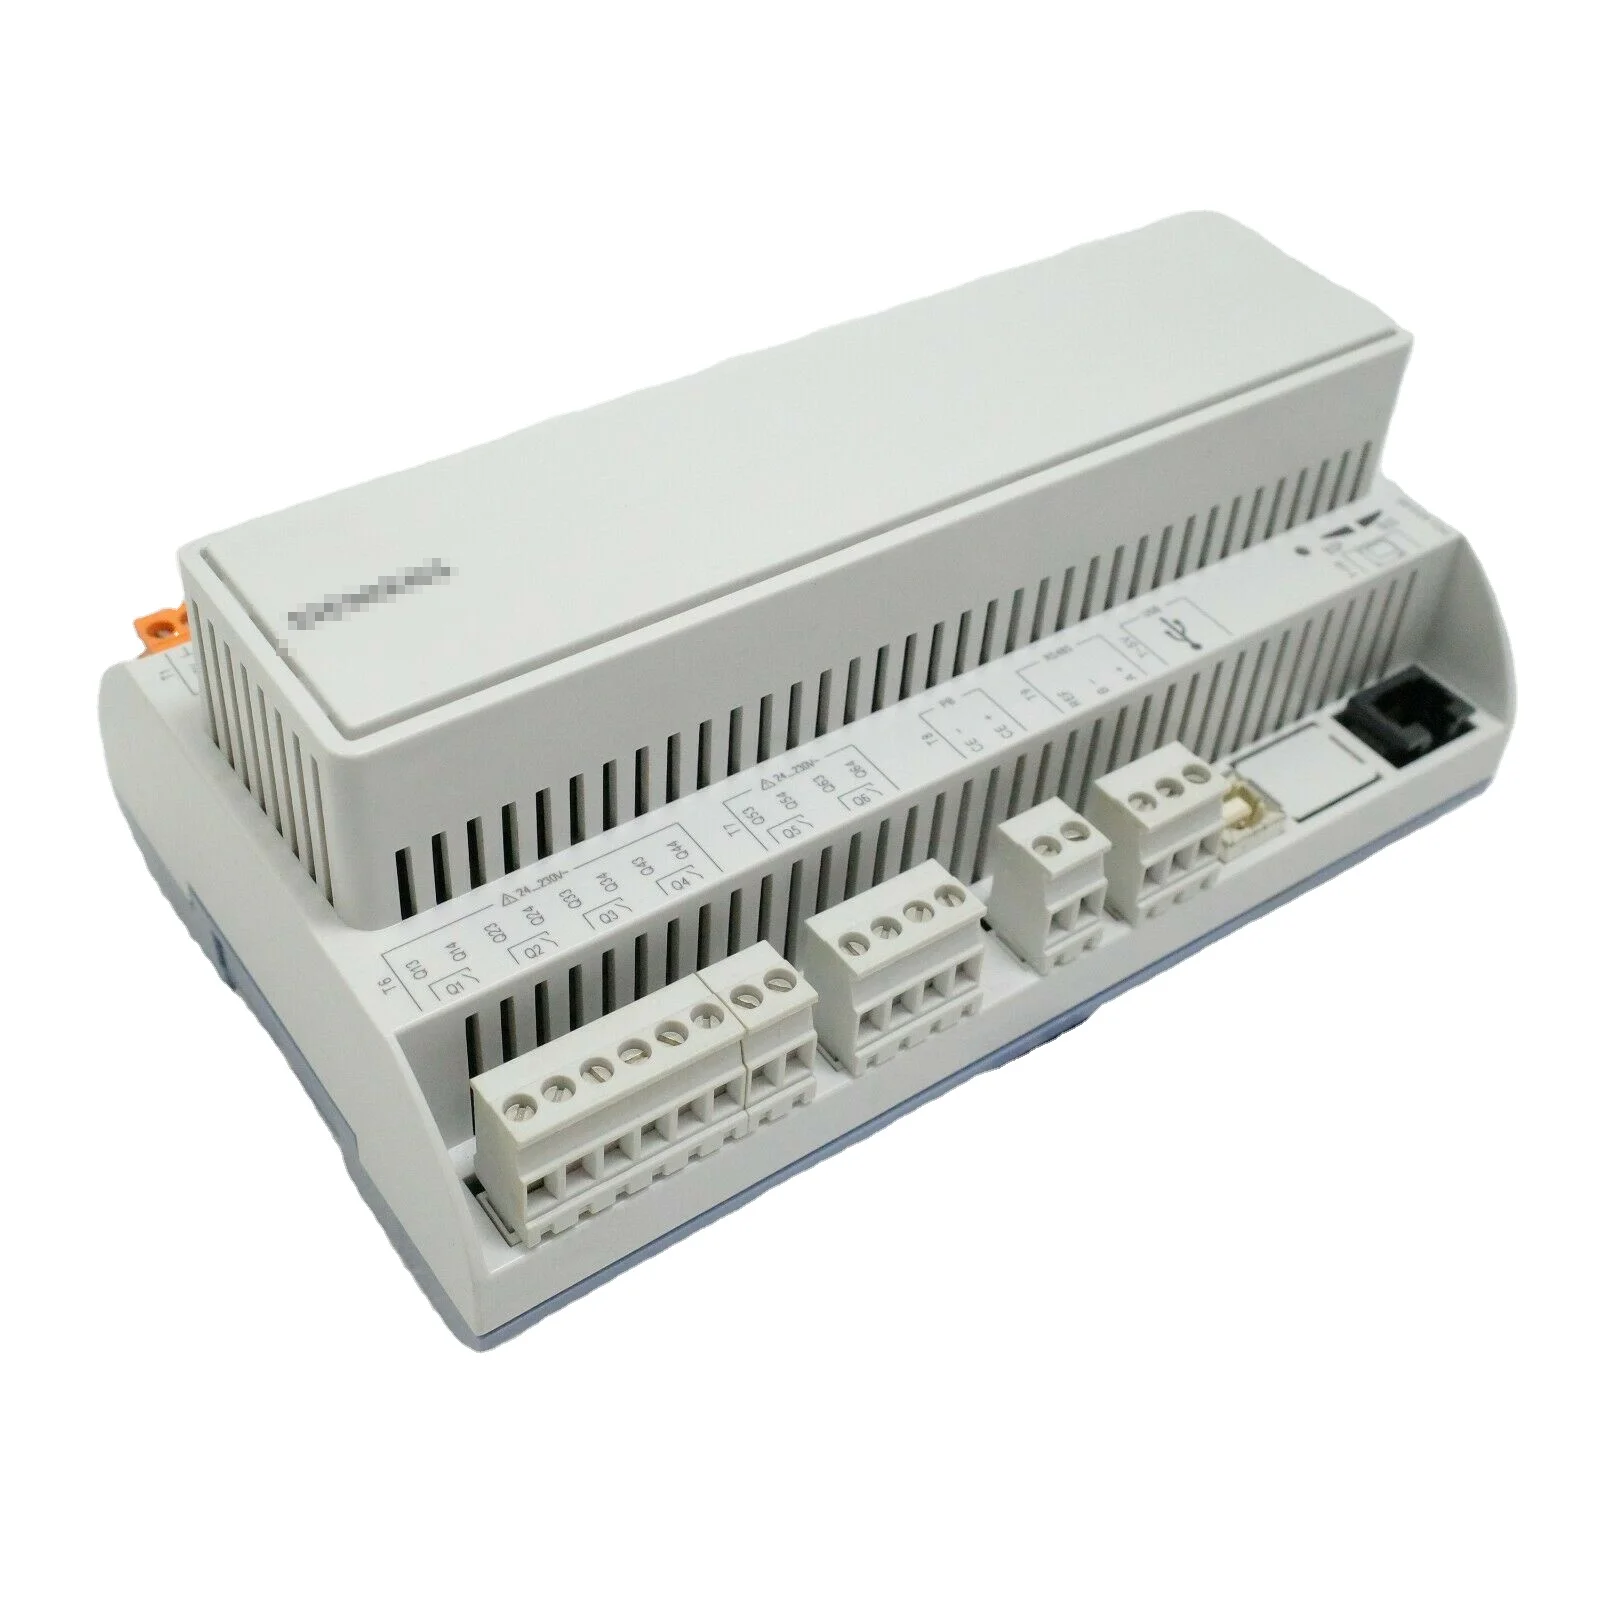 Used In Good Condition DDC Programmable Controller POL635.00 POL424.50/STD POL424.50 POL424